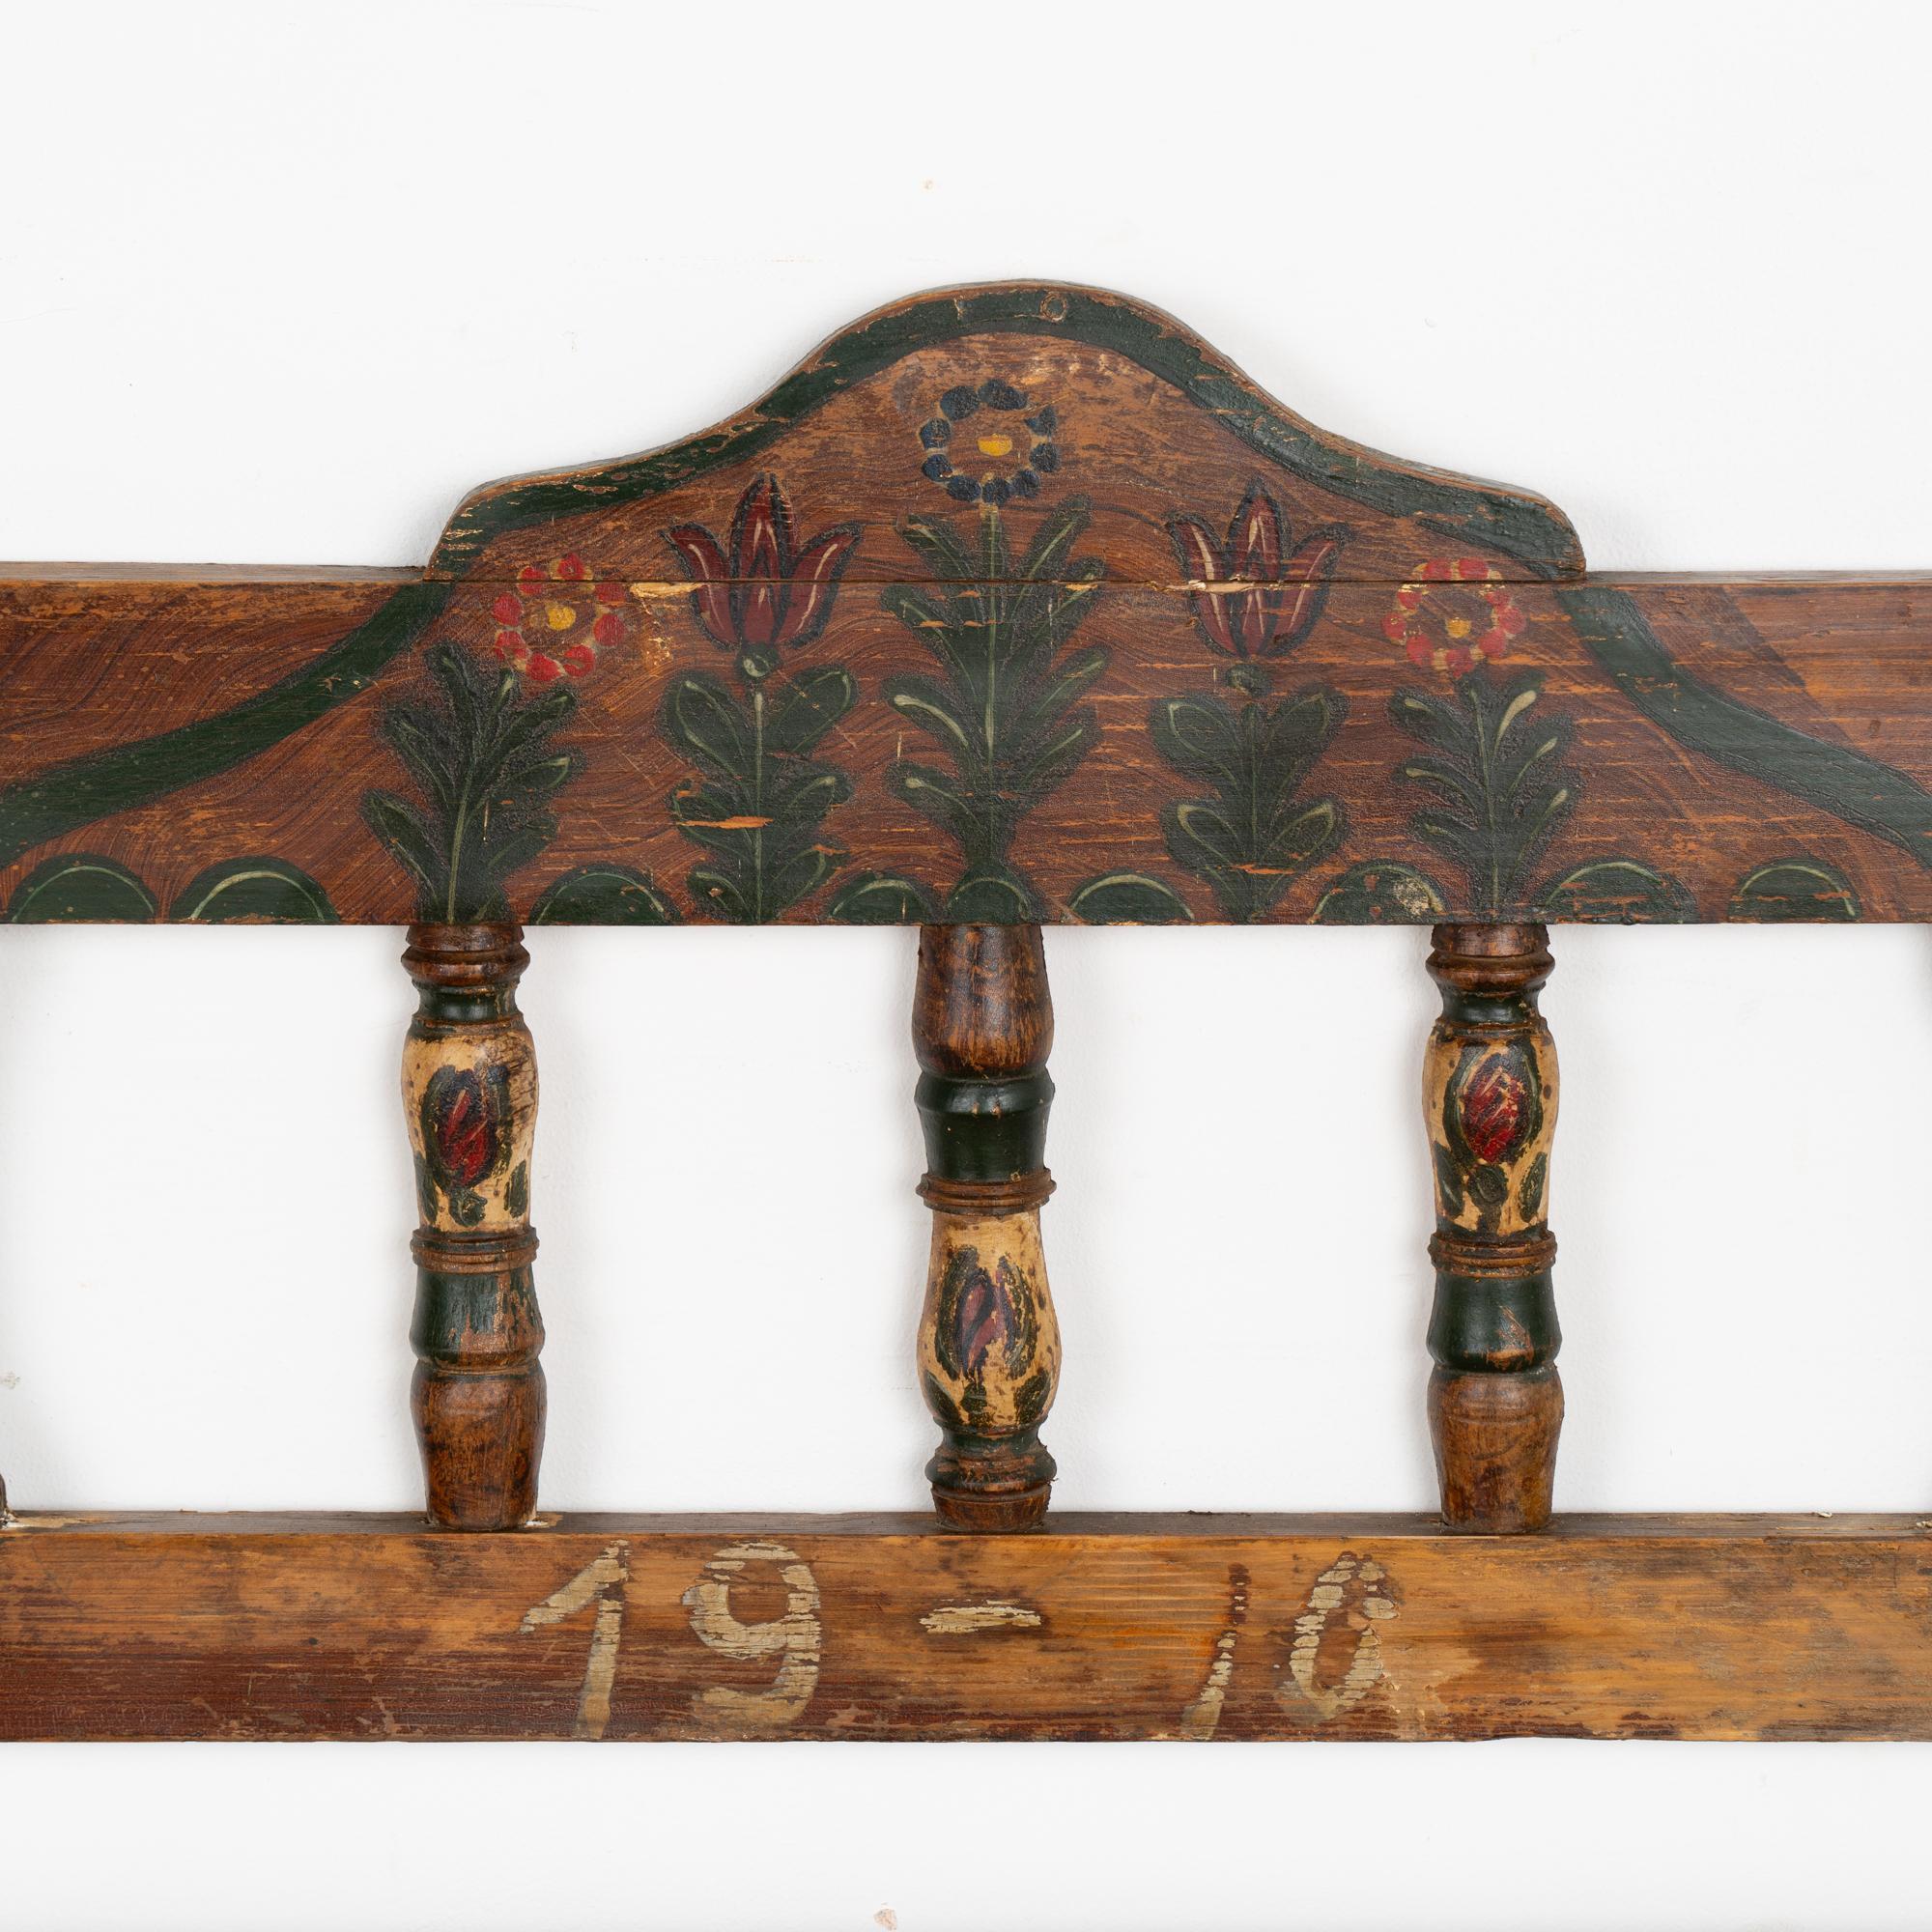 Original Painted Pine Bench With Storage, Hungary dated 1910 For Sale 4